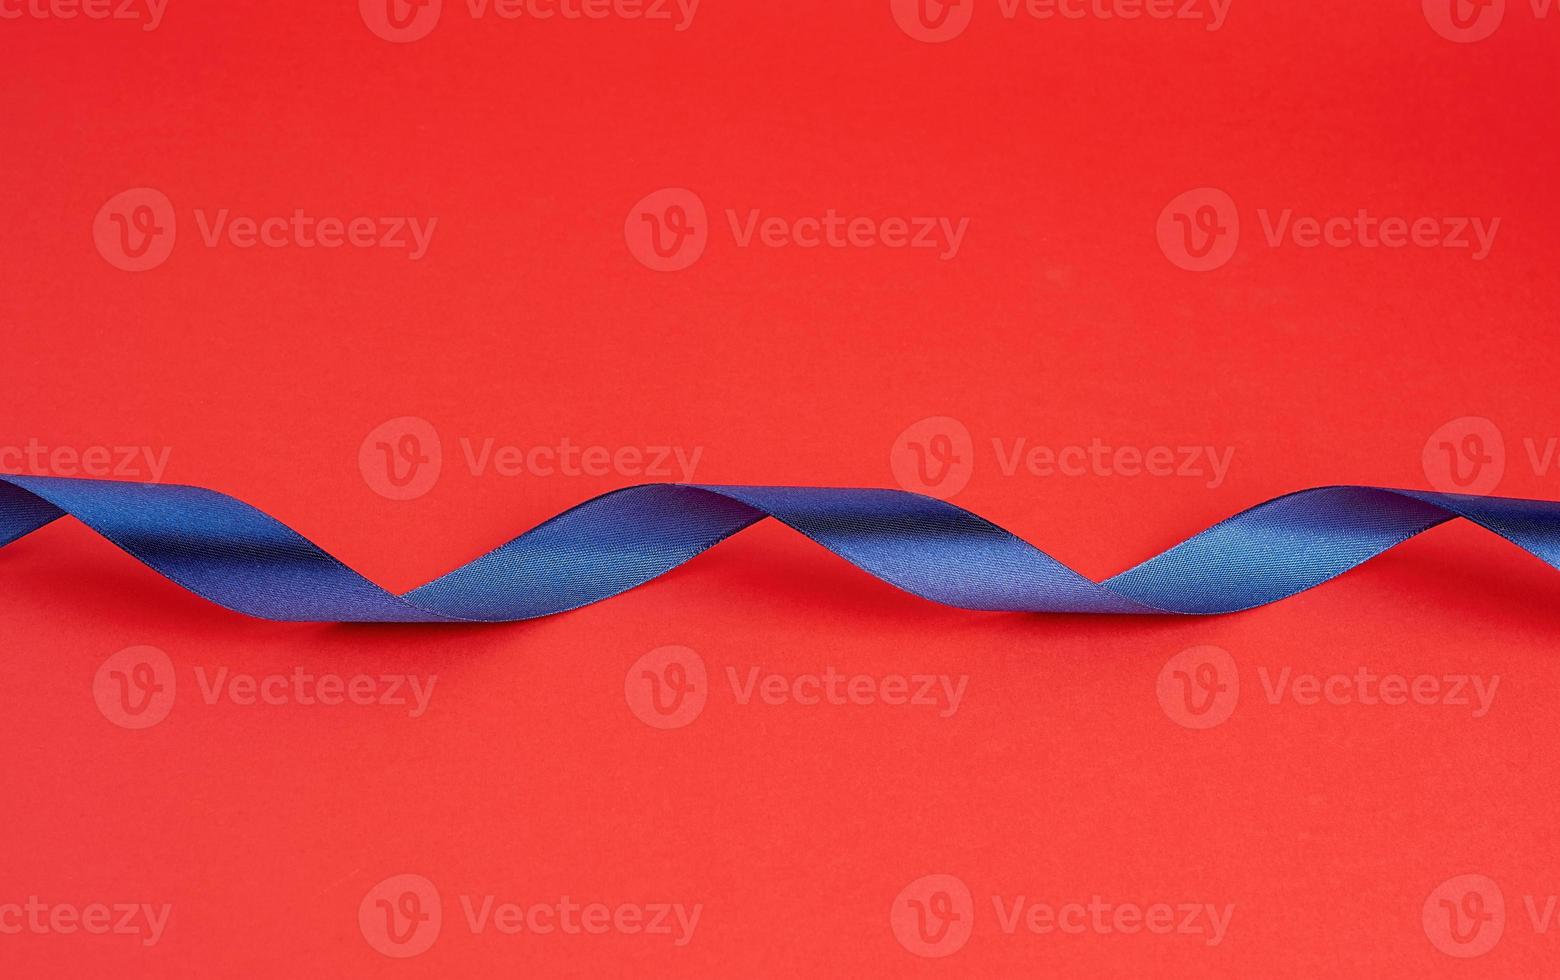 twisted dark blue silk shiny ribbon on a red background photo